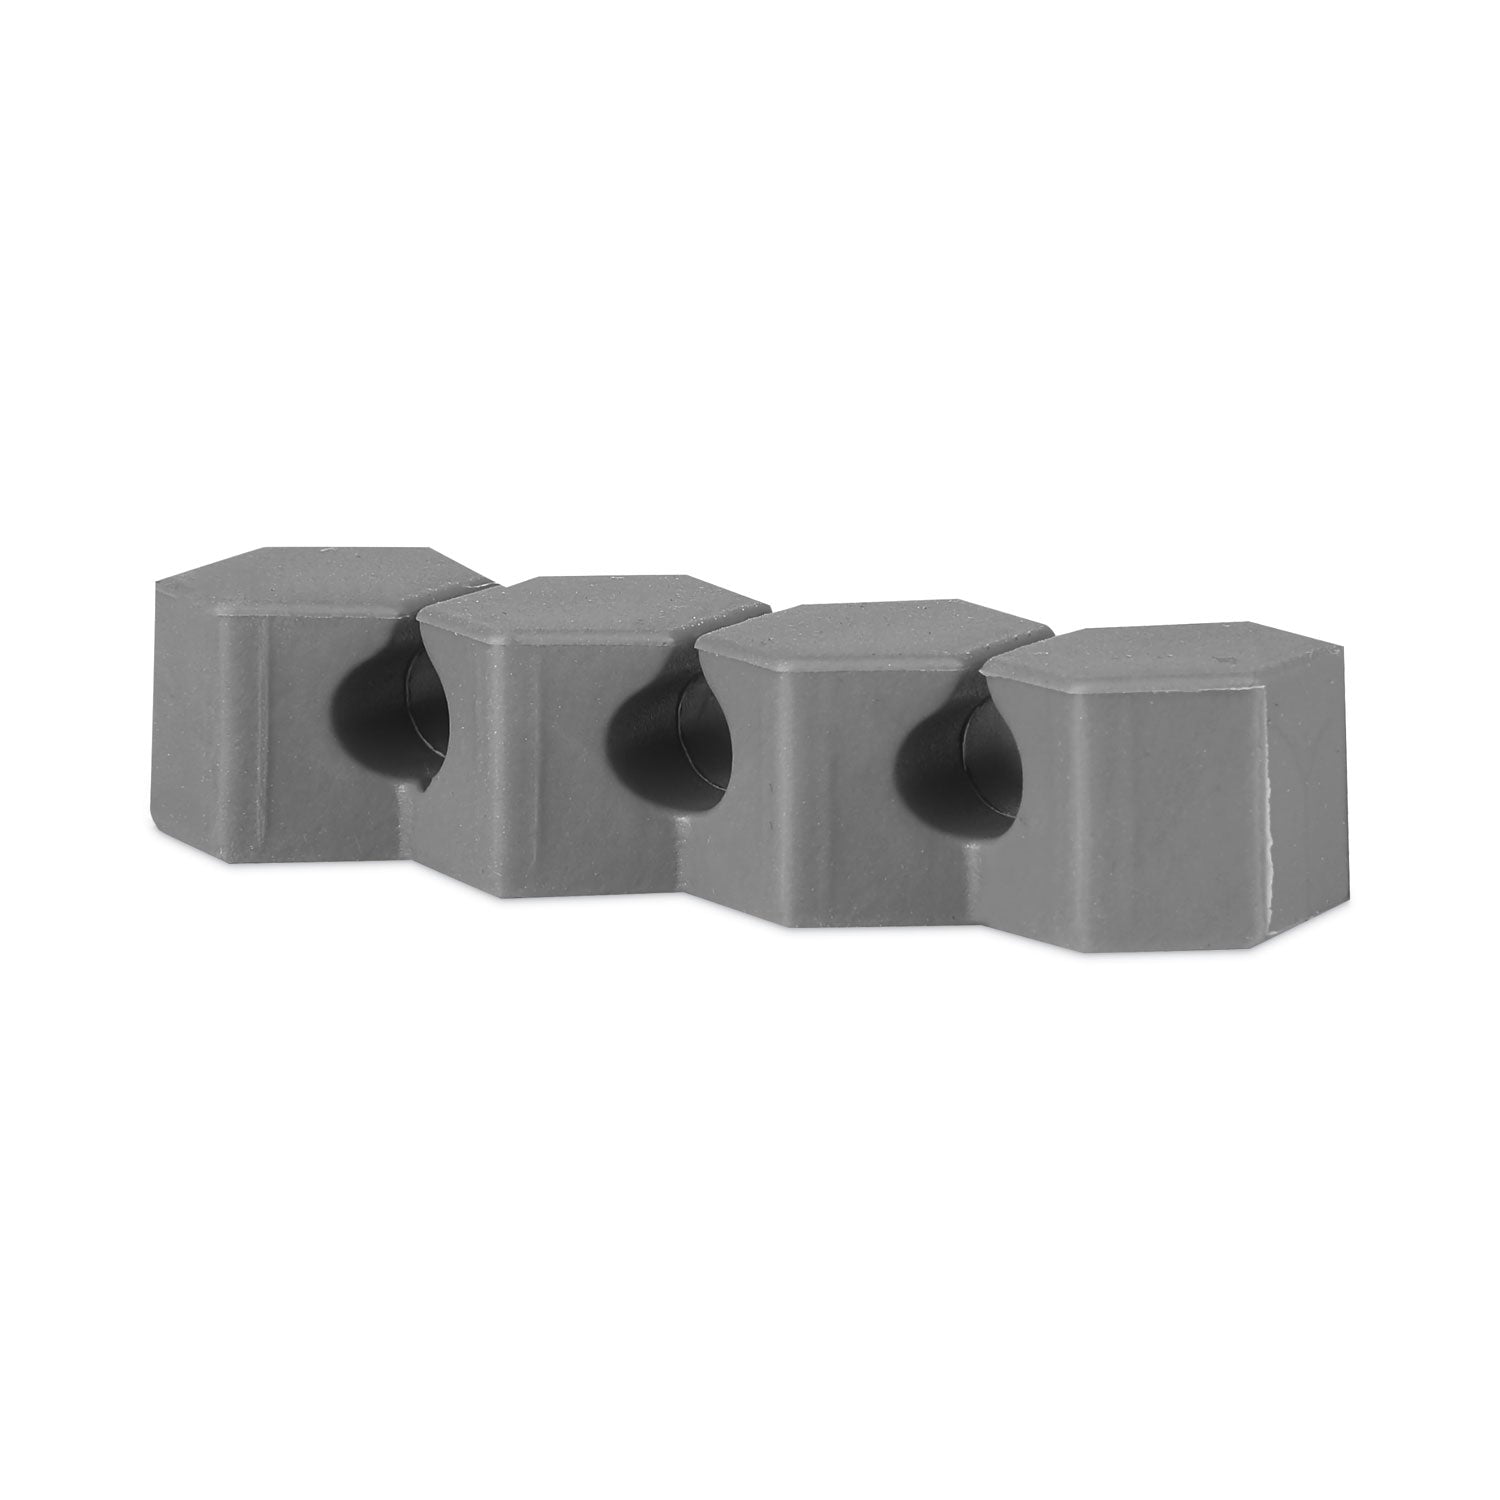 three-channel-cable-holder-2-x-2-gray-4-pack_voxrccm3gyv - 3